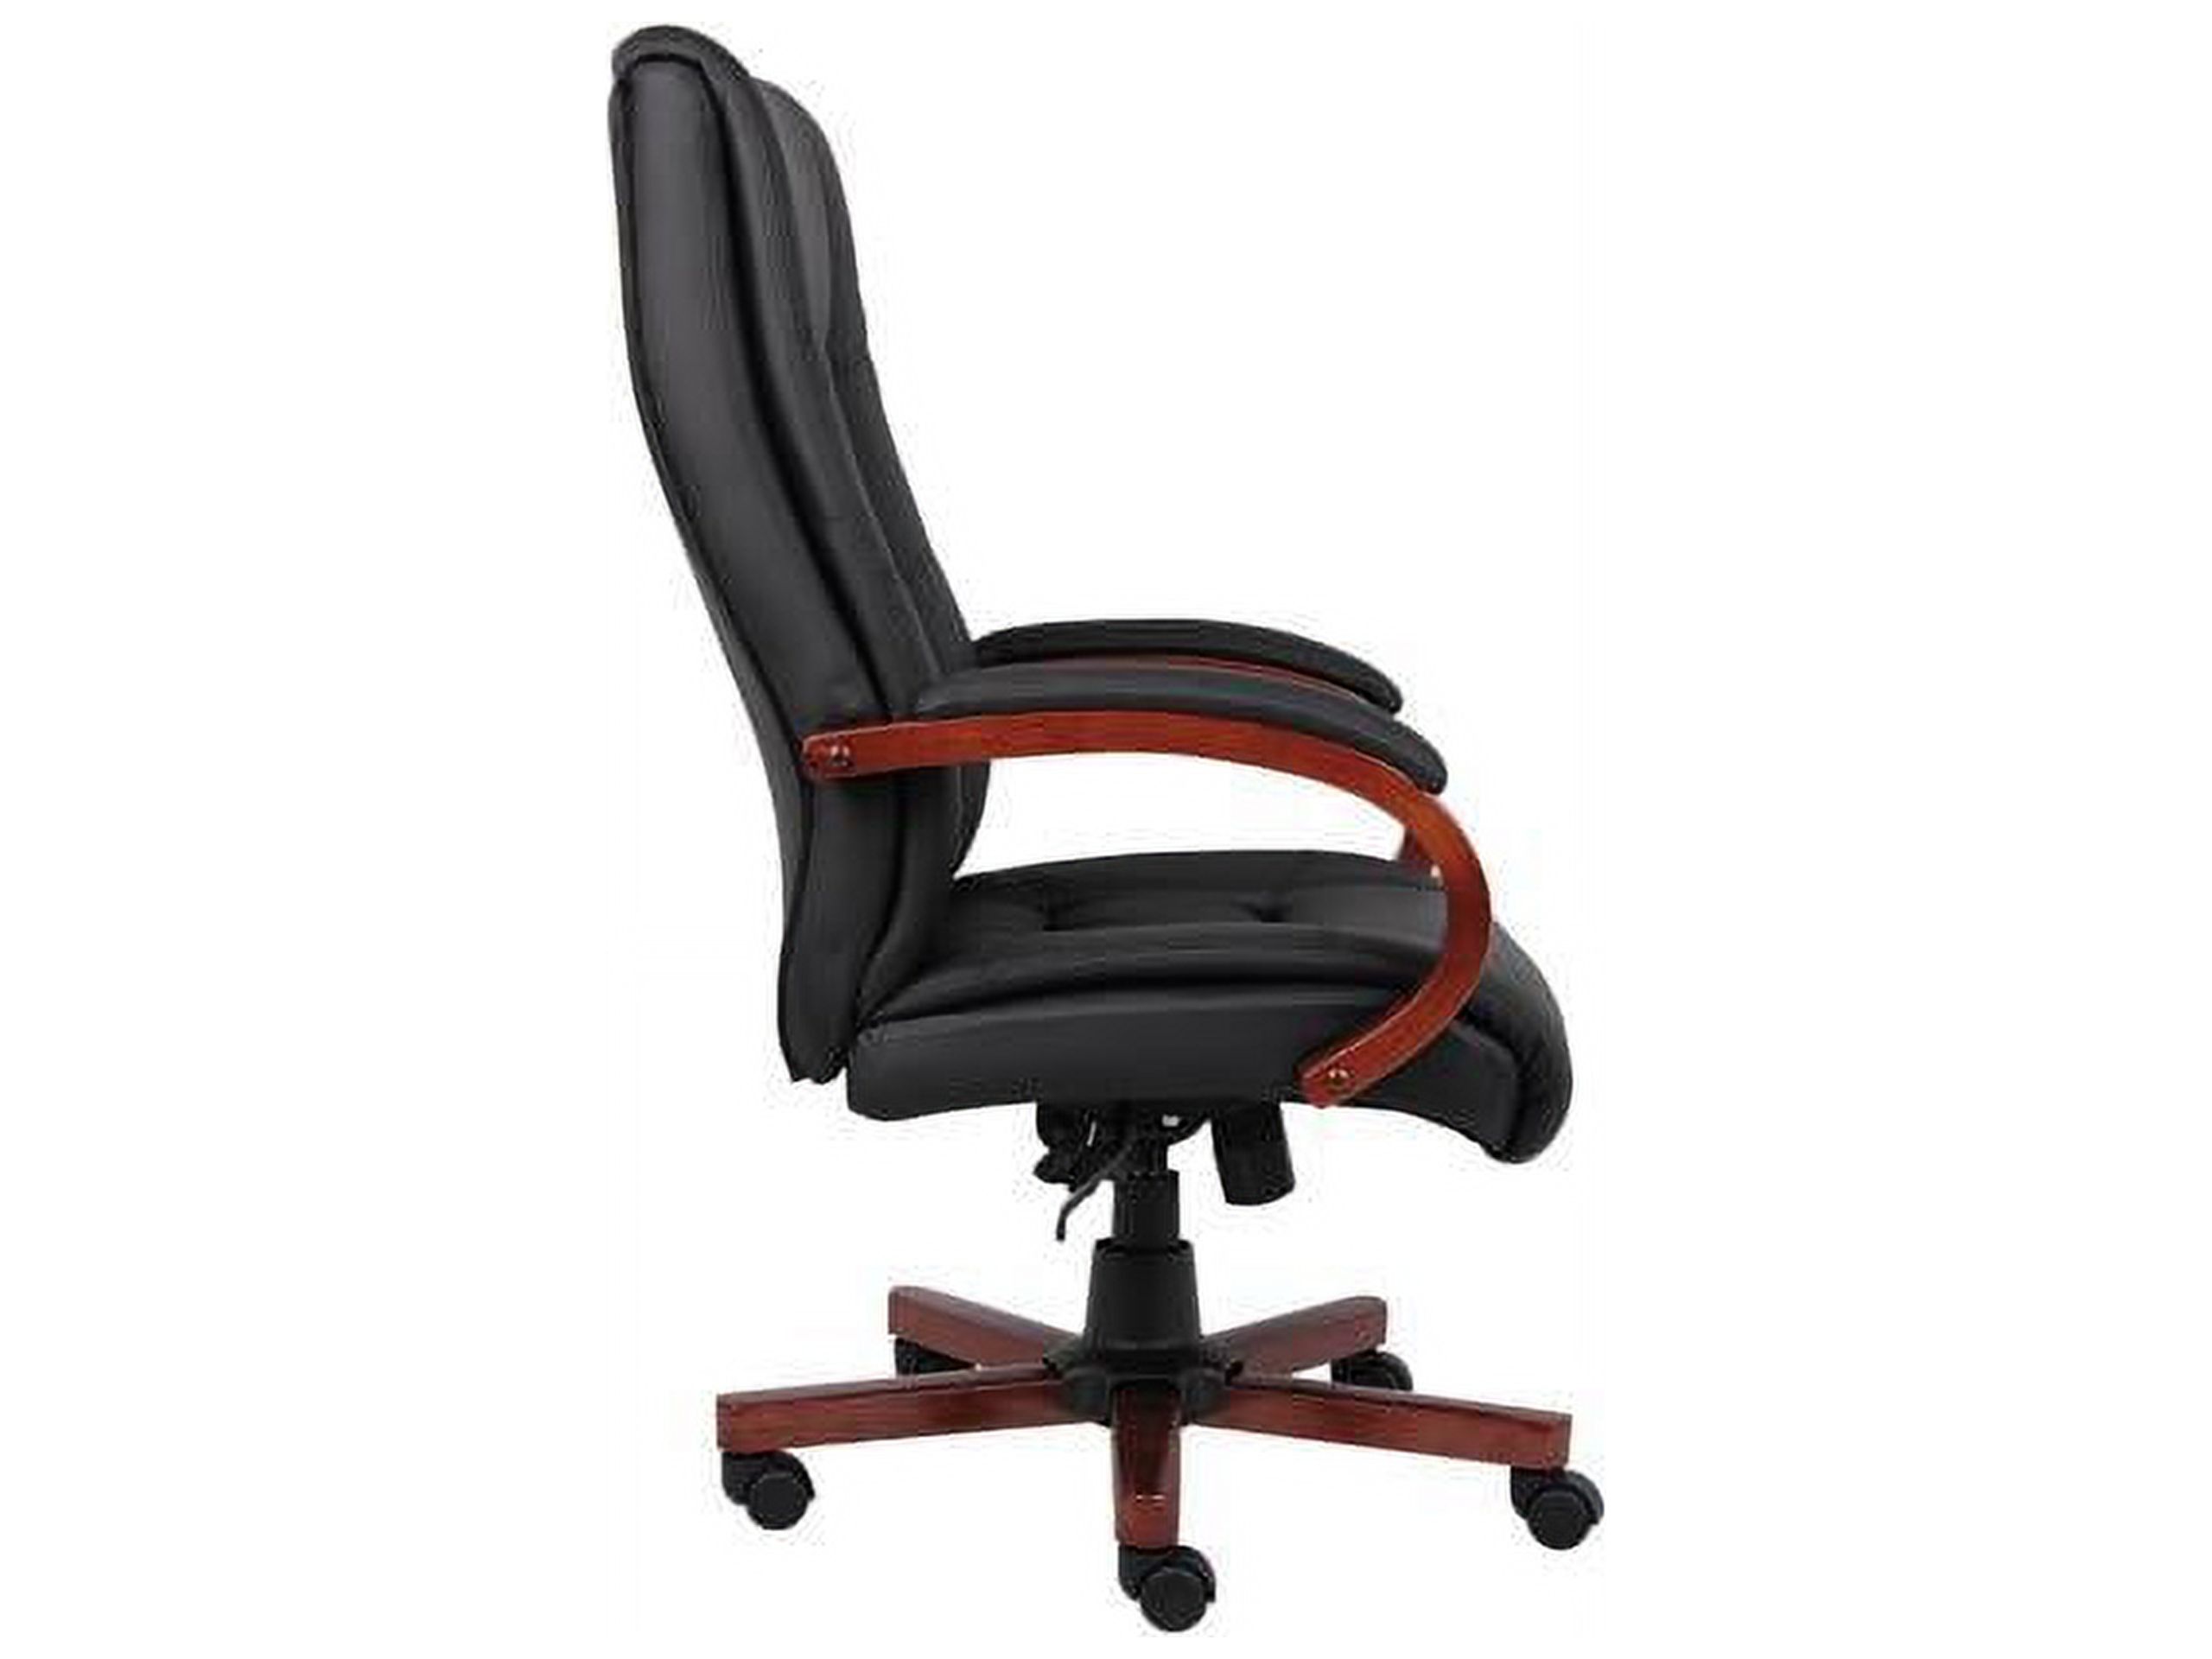 BOSS Office Products B8991-C Executive Chairs - image 4 of 5